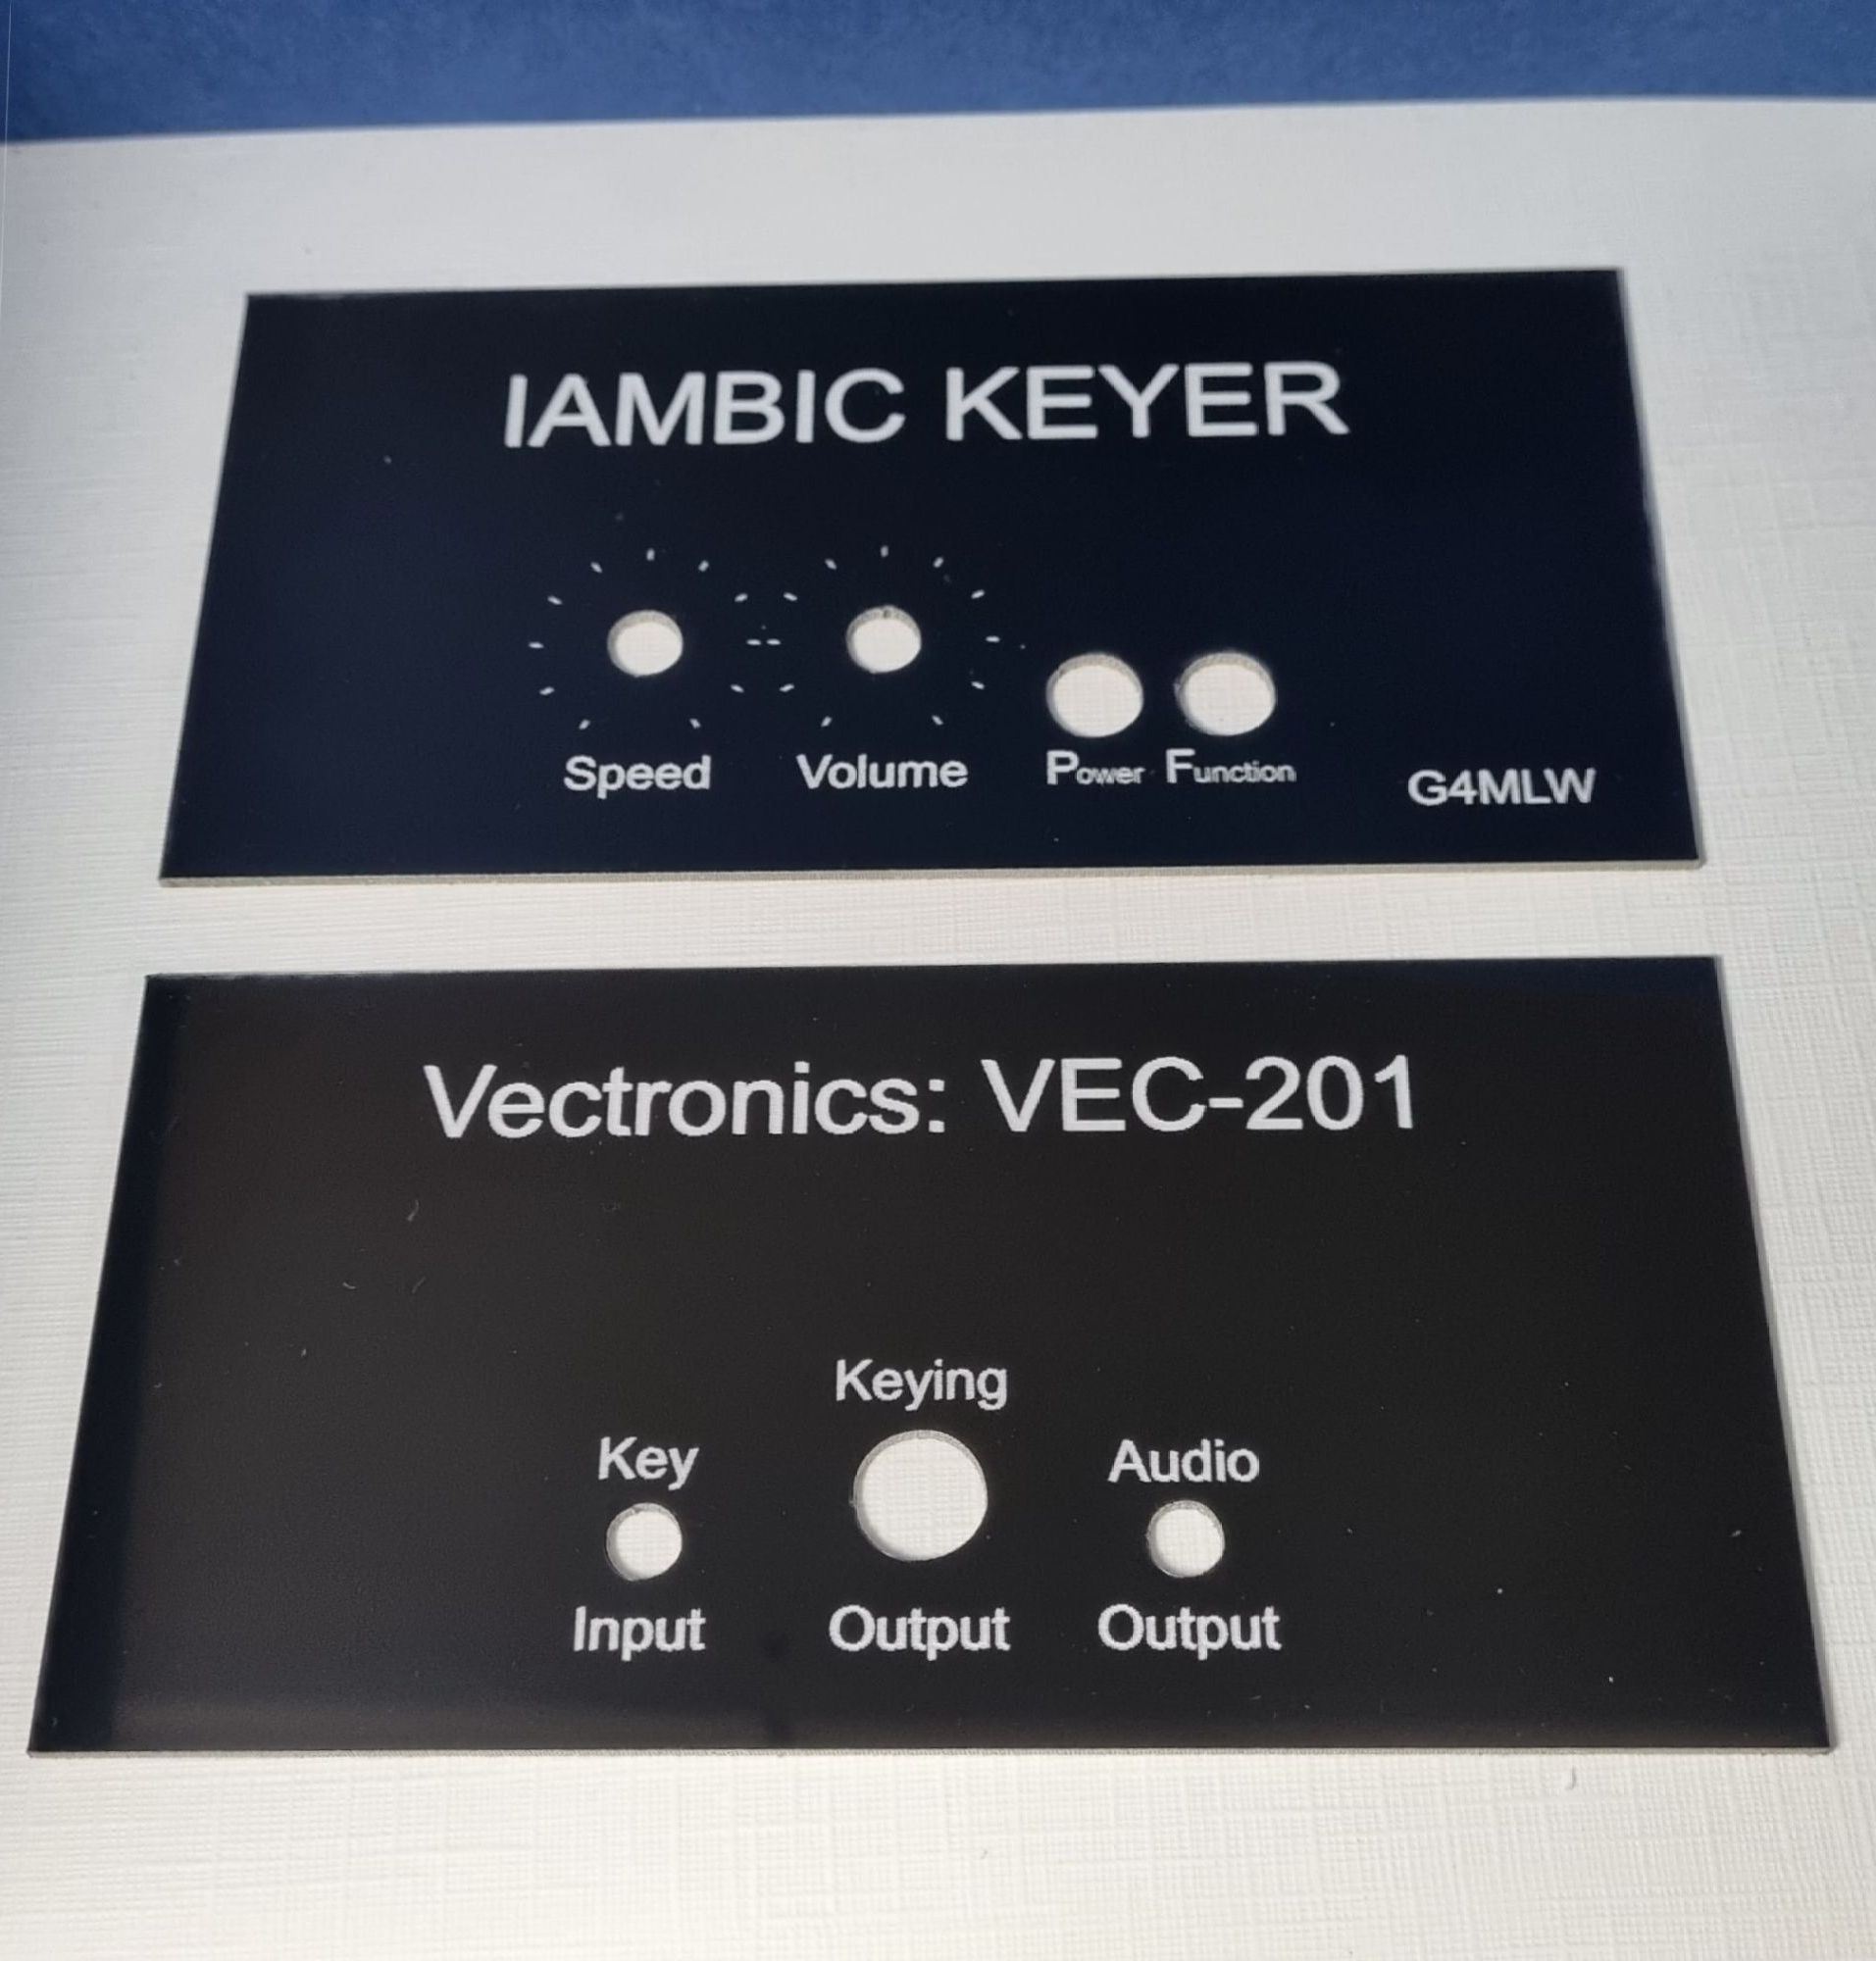 Iambic Keyer front and back plates